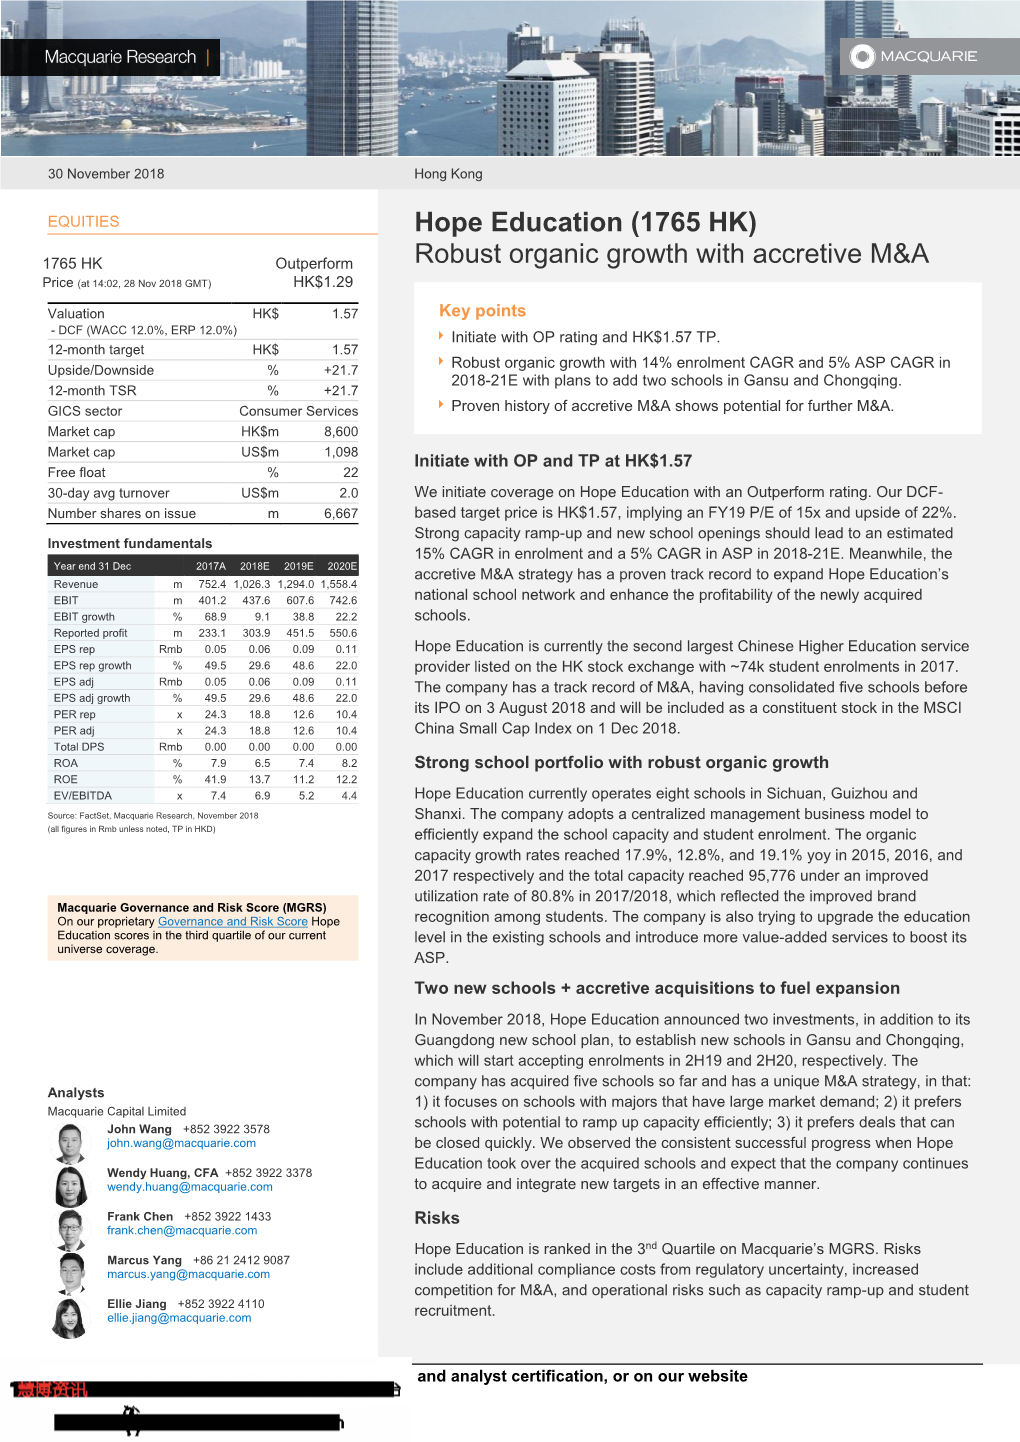 Hope Education (1765 HK) Robust Organic Growth with Accretive M&A